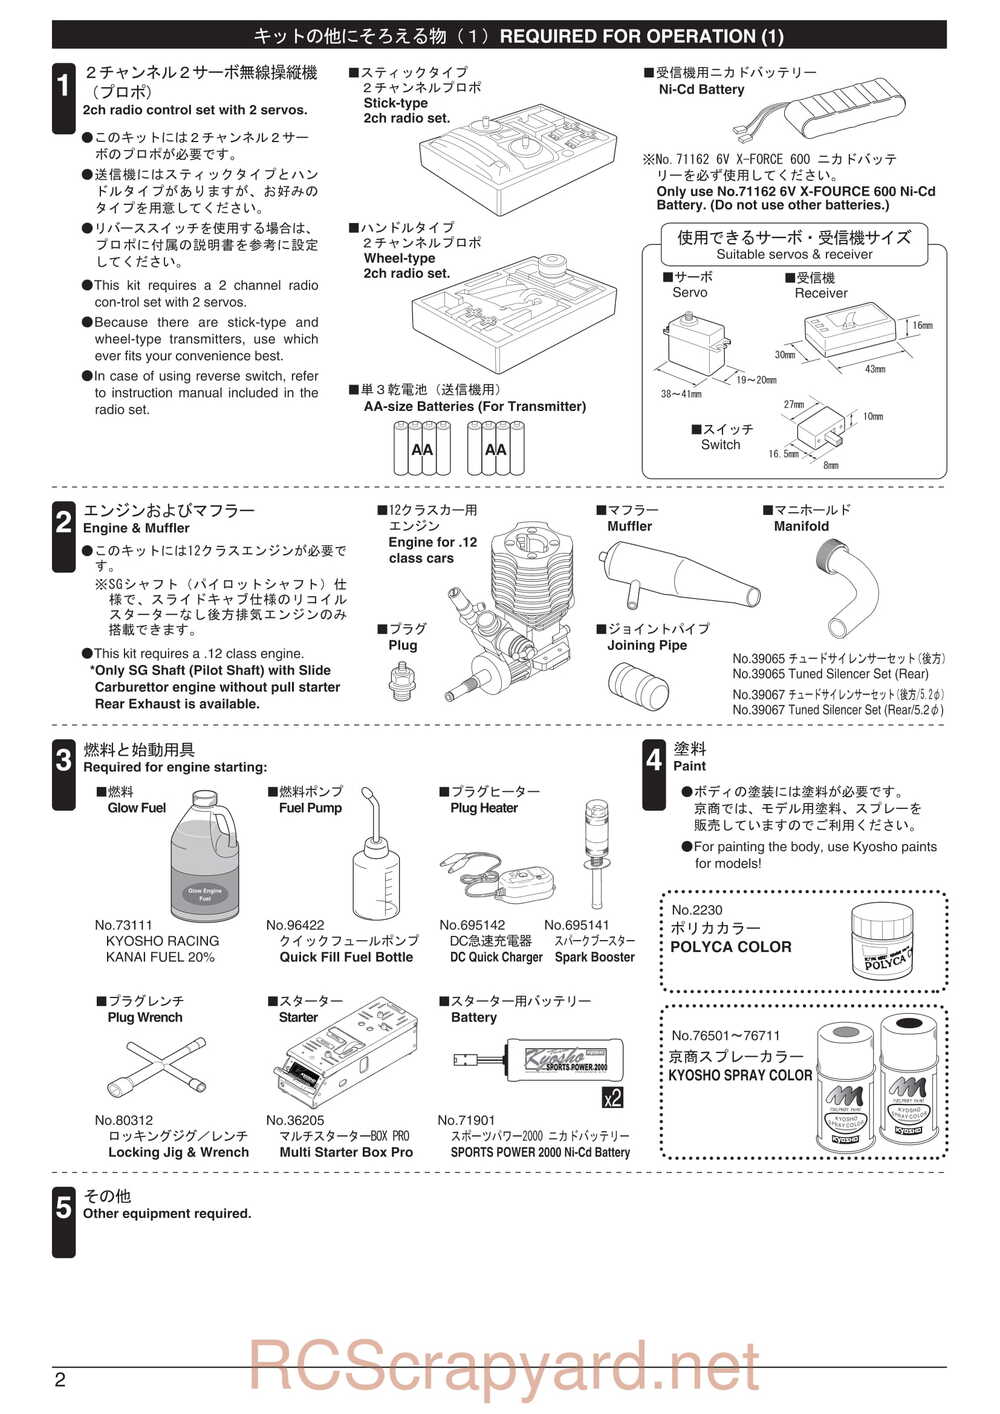 Kyosho - 31257 - V-One RRR Rubber - Manual - Page 02